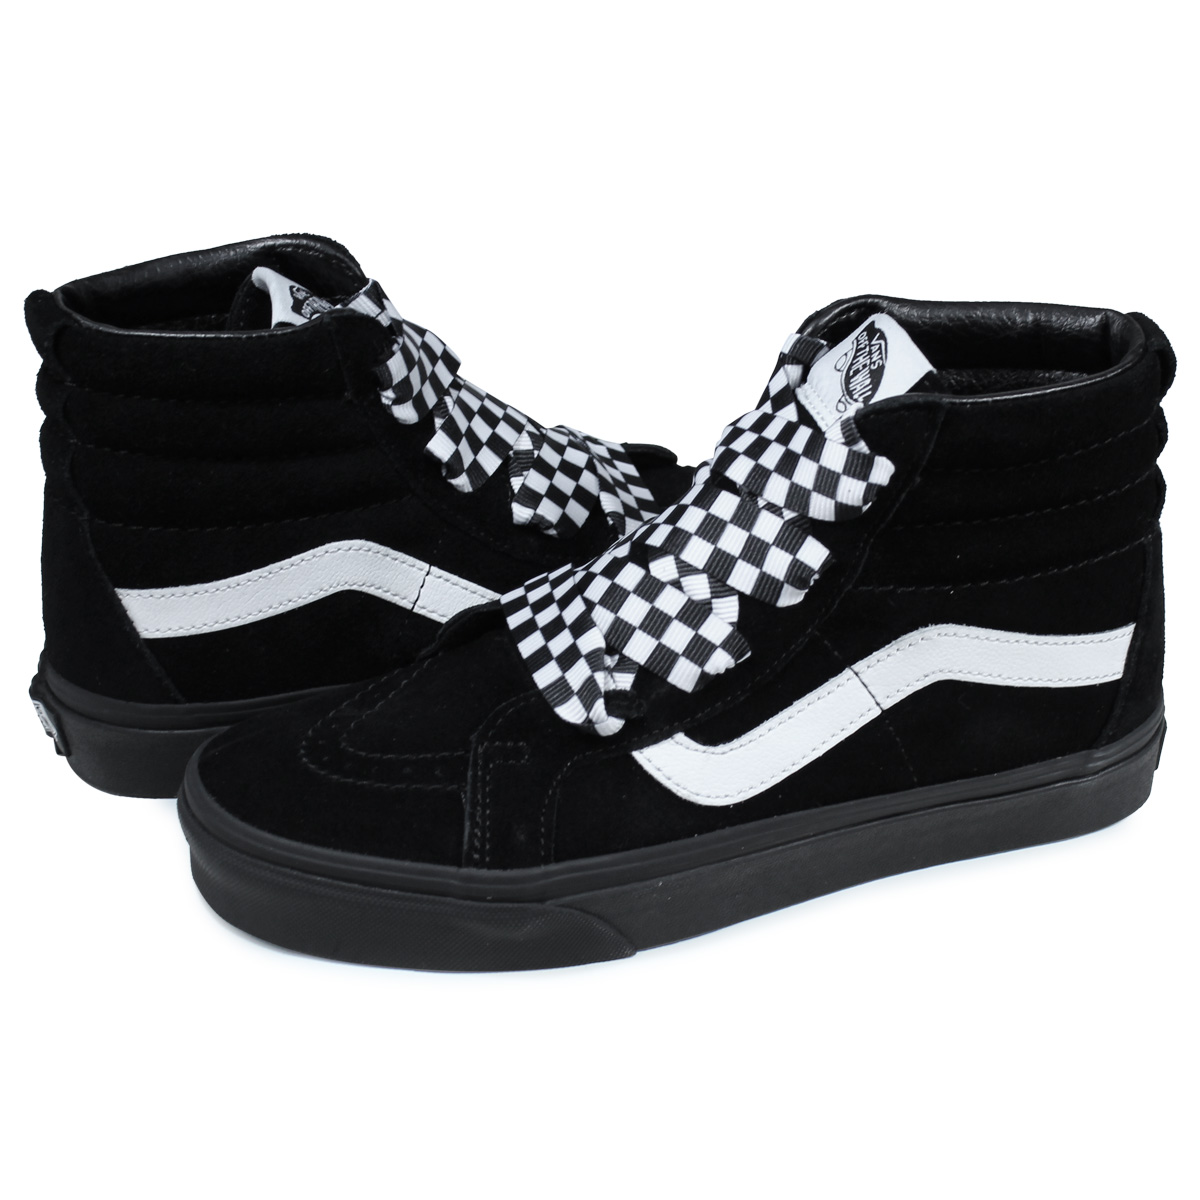 black and white vans with laces